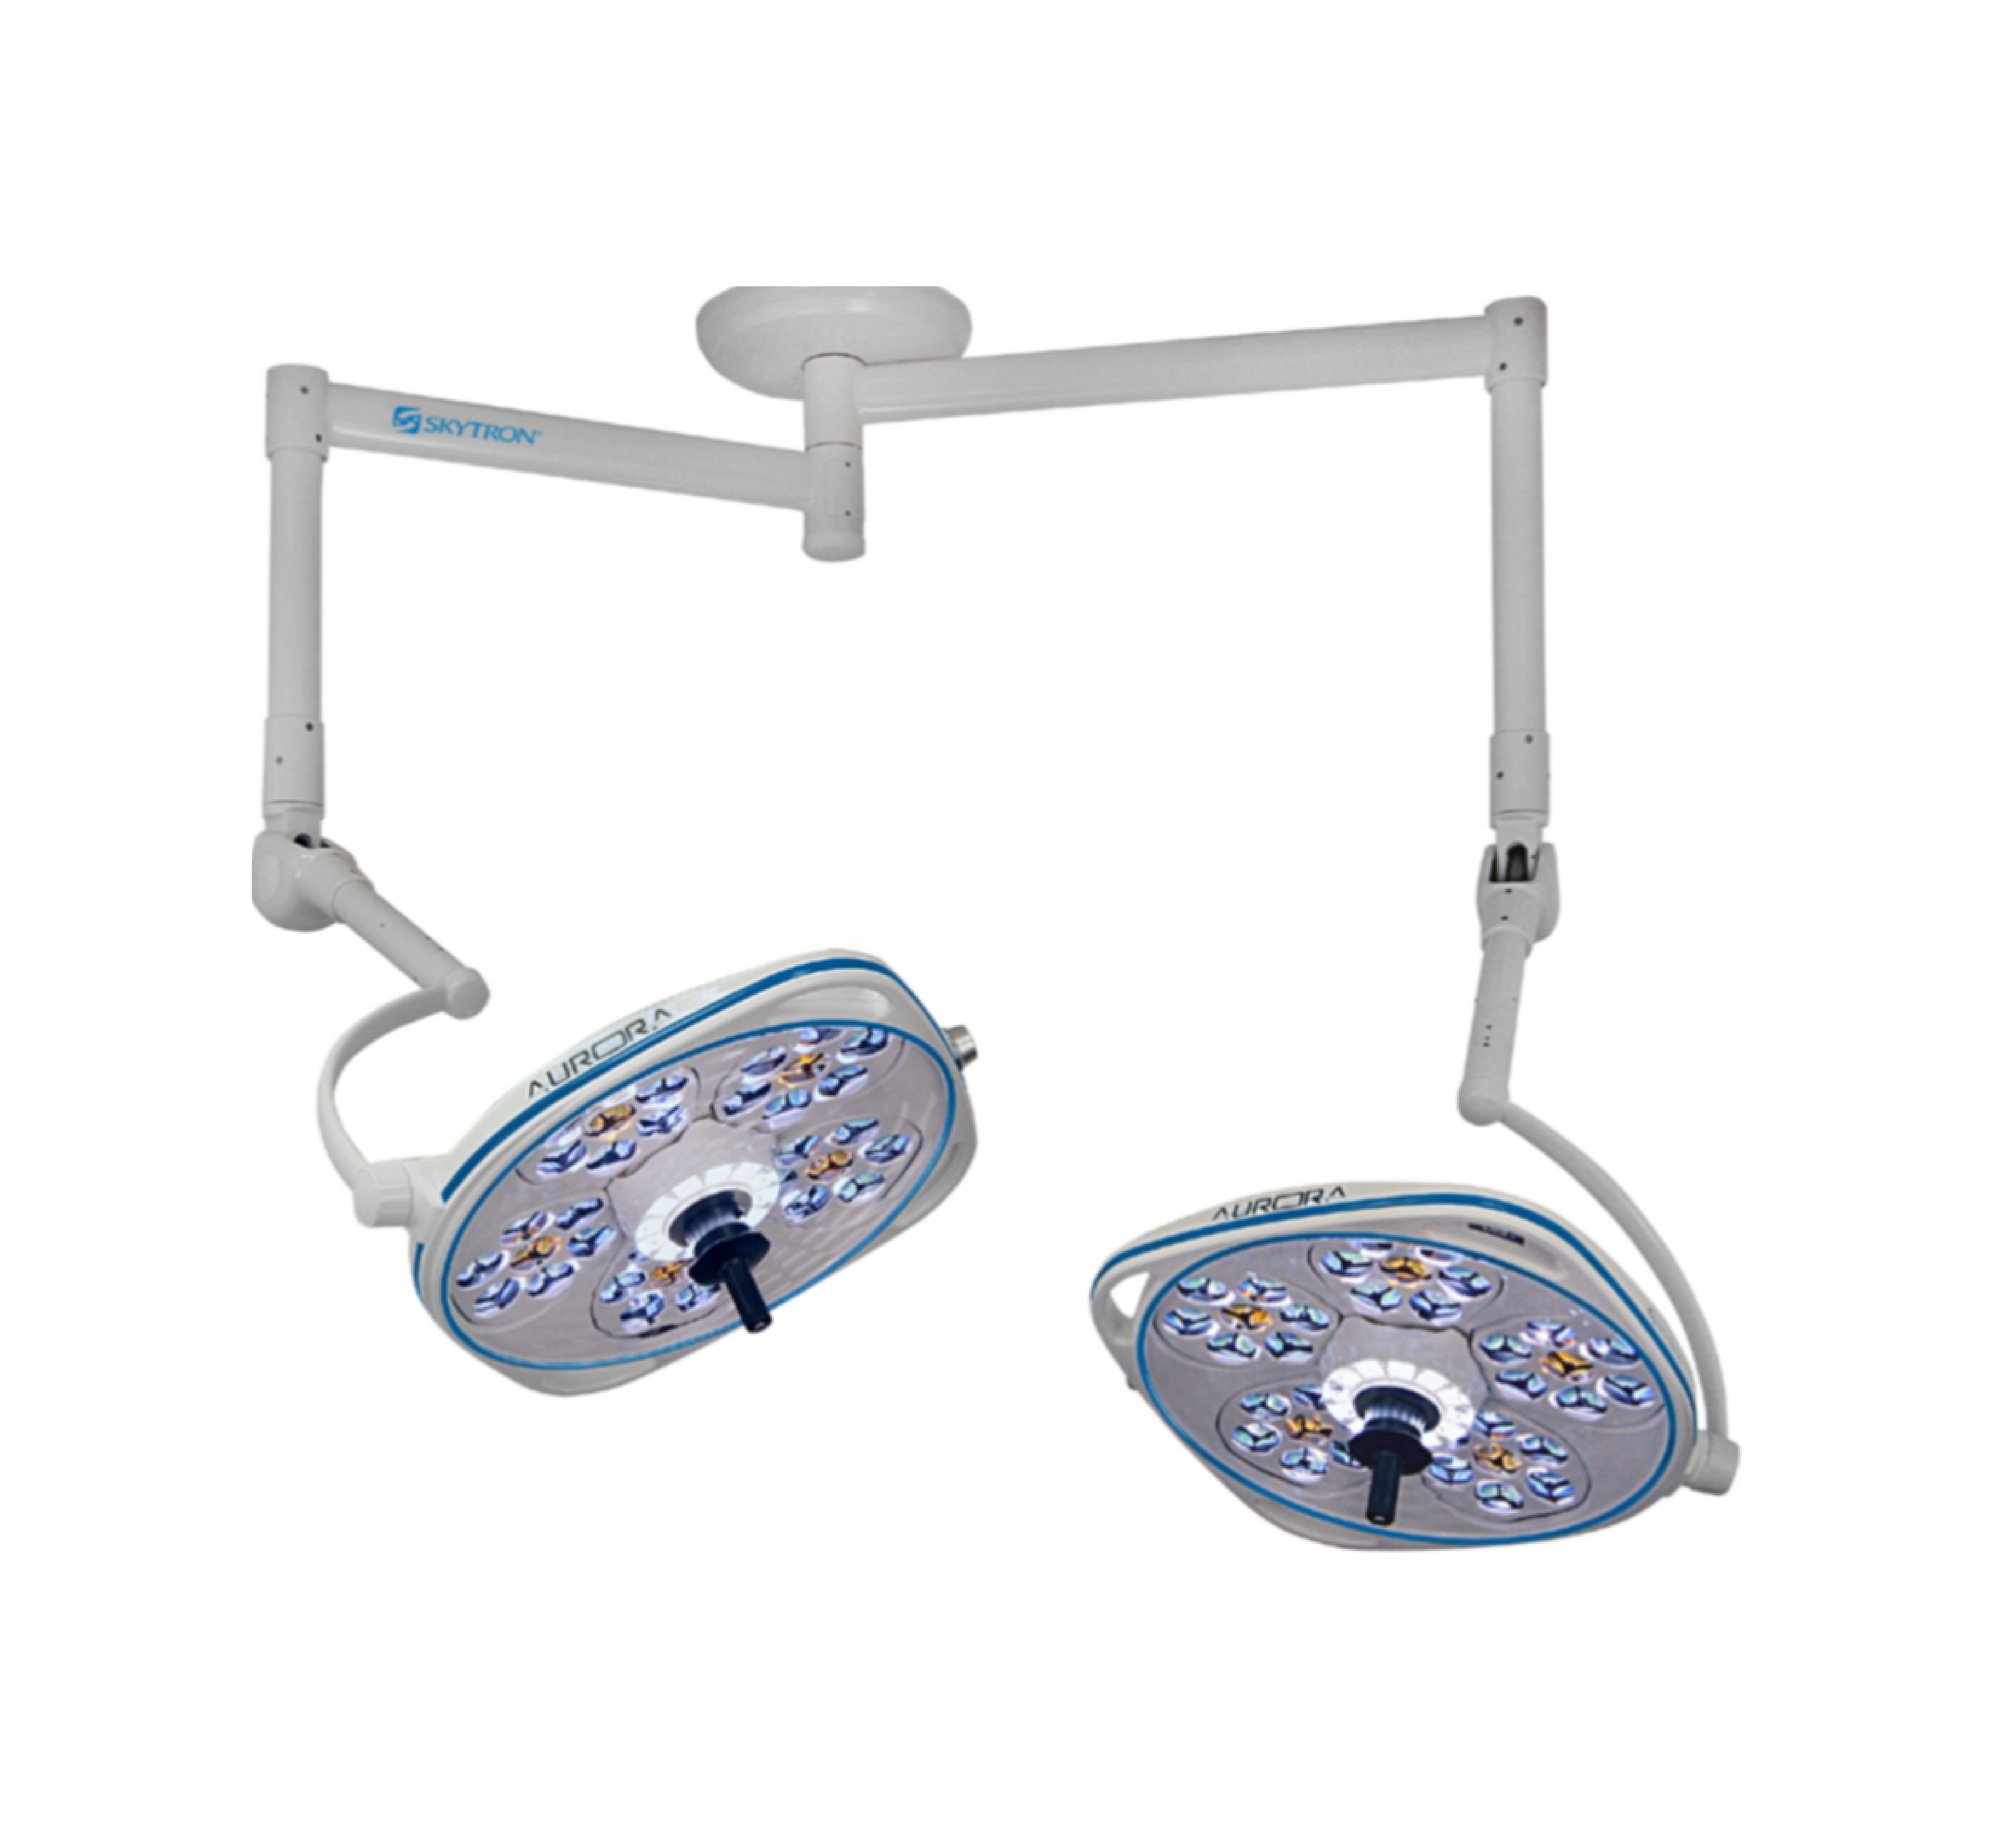 Dual, Variable-Focus 24 Inch LED Surgical Lighting Fixture